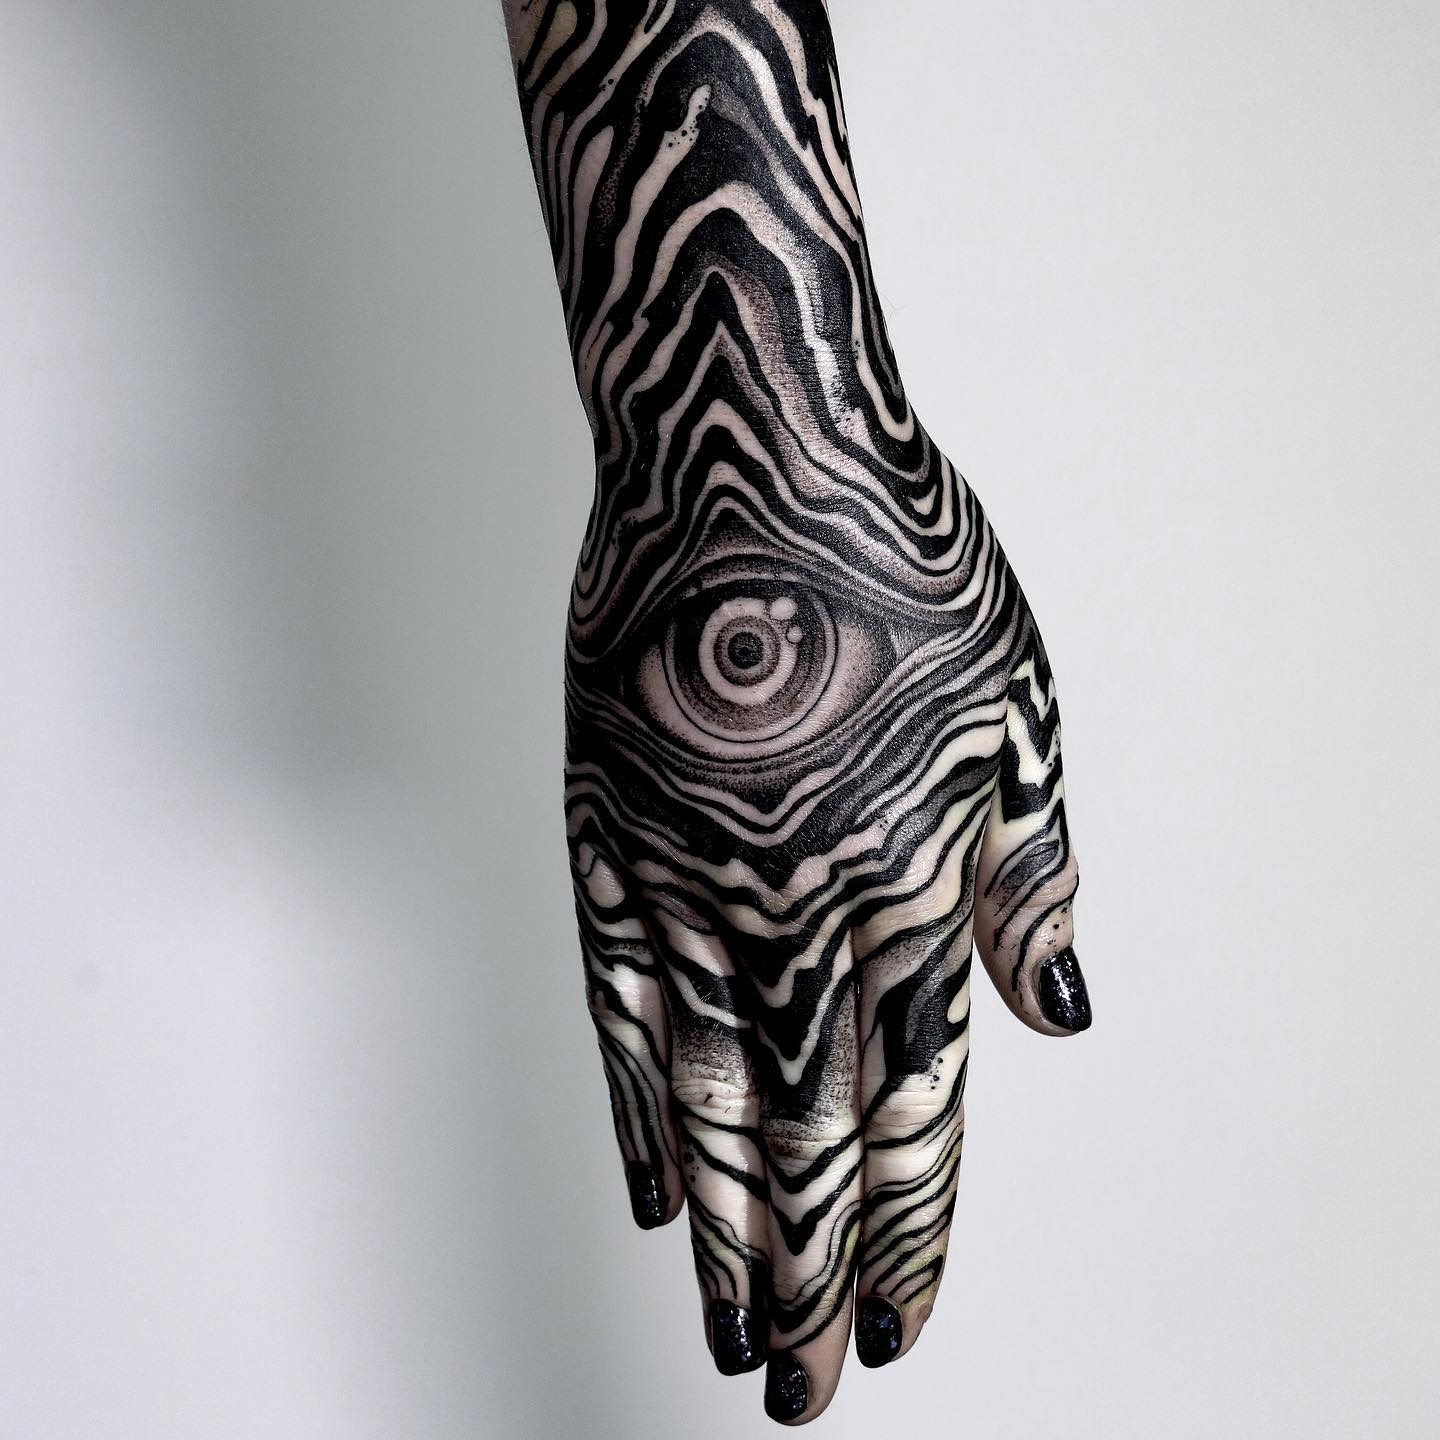 Black Abstract sleeve with cover up done by Adel Gafarov at Chill Ink  Studio in Kazan Russia  rtattoos